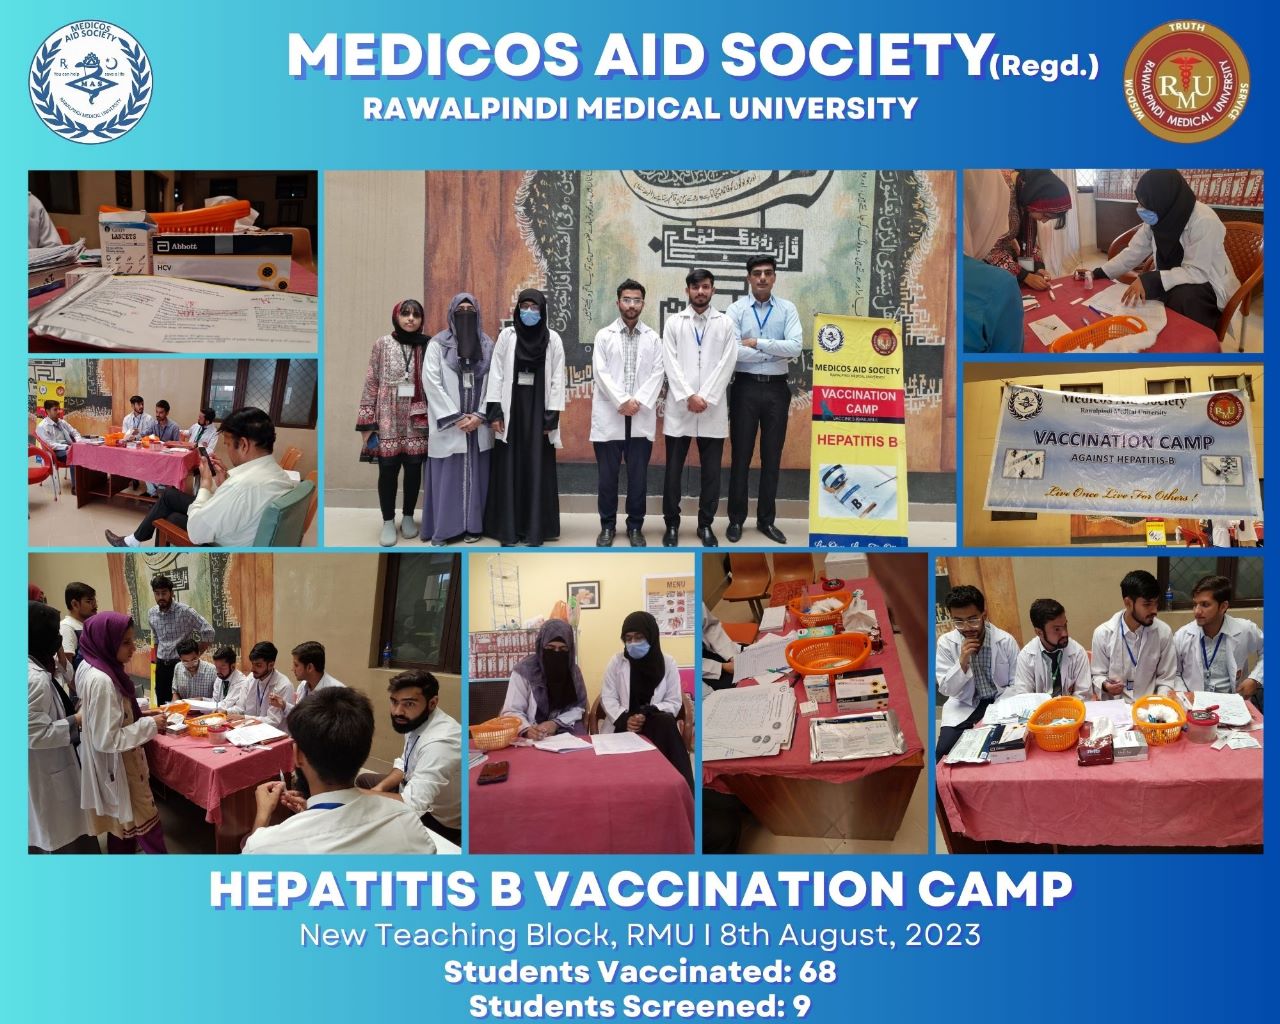 Vaccination & screening camp against Hepatitis B on Tuesday, 8th August, 2023 at New Teaching Block, RMUM  Vaccinated: 68 Screened: 9